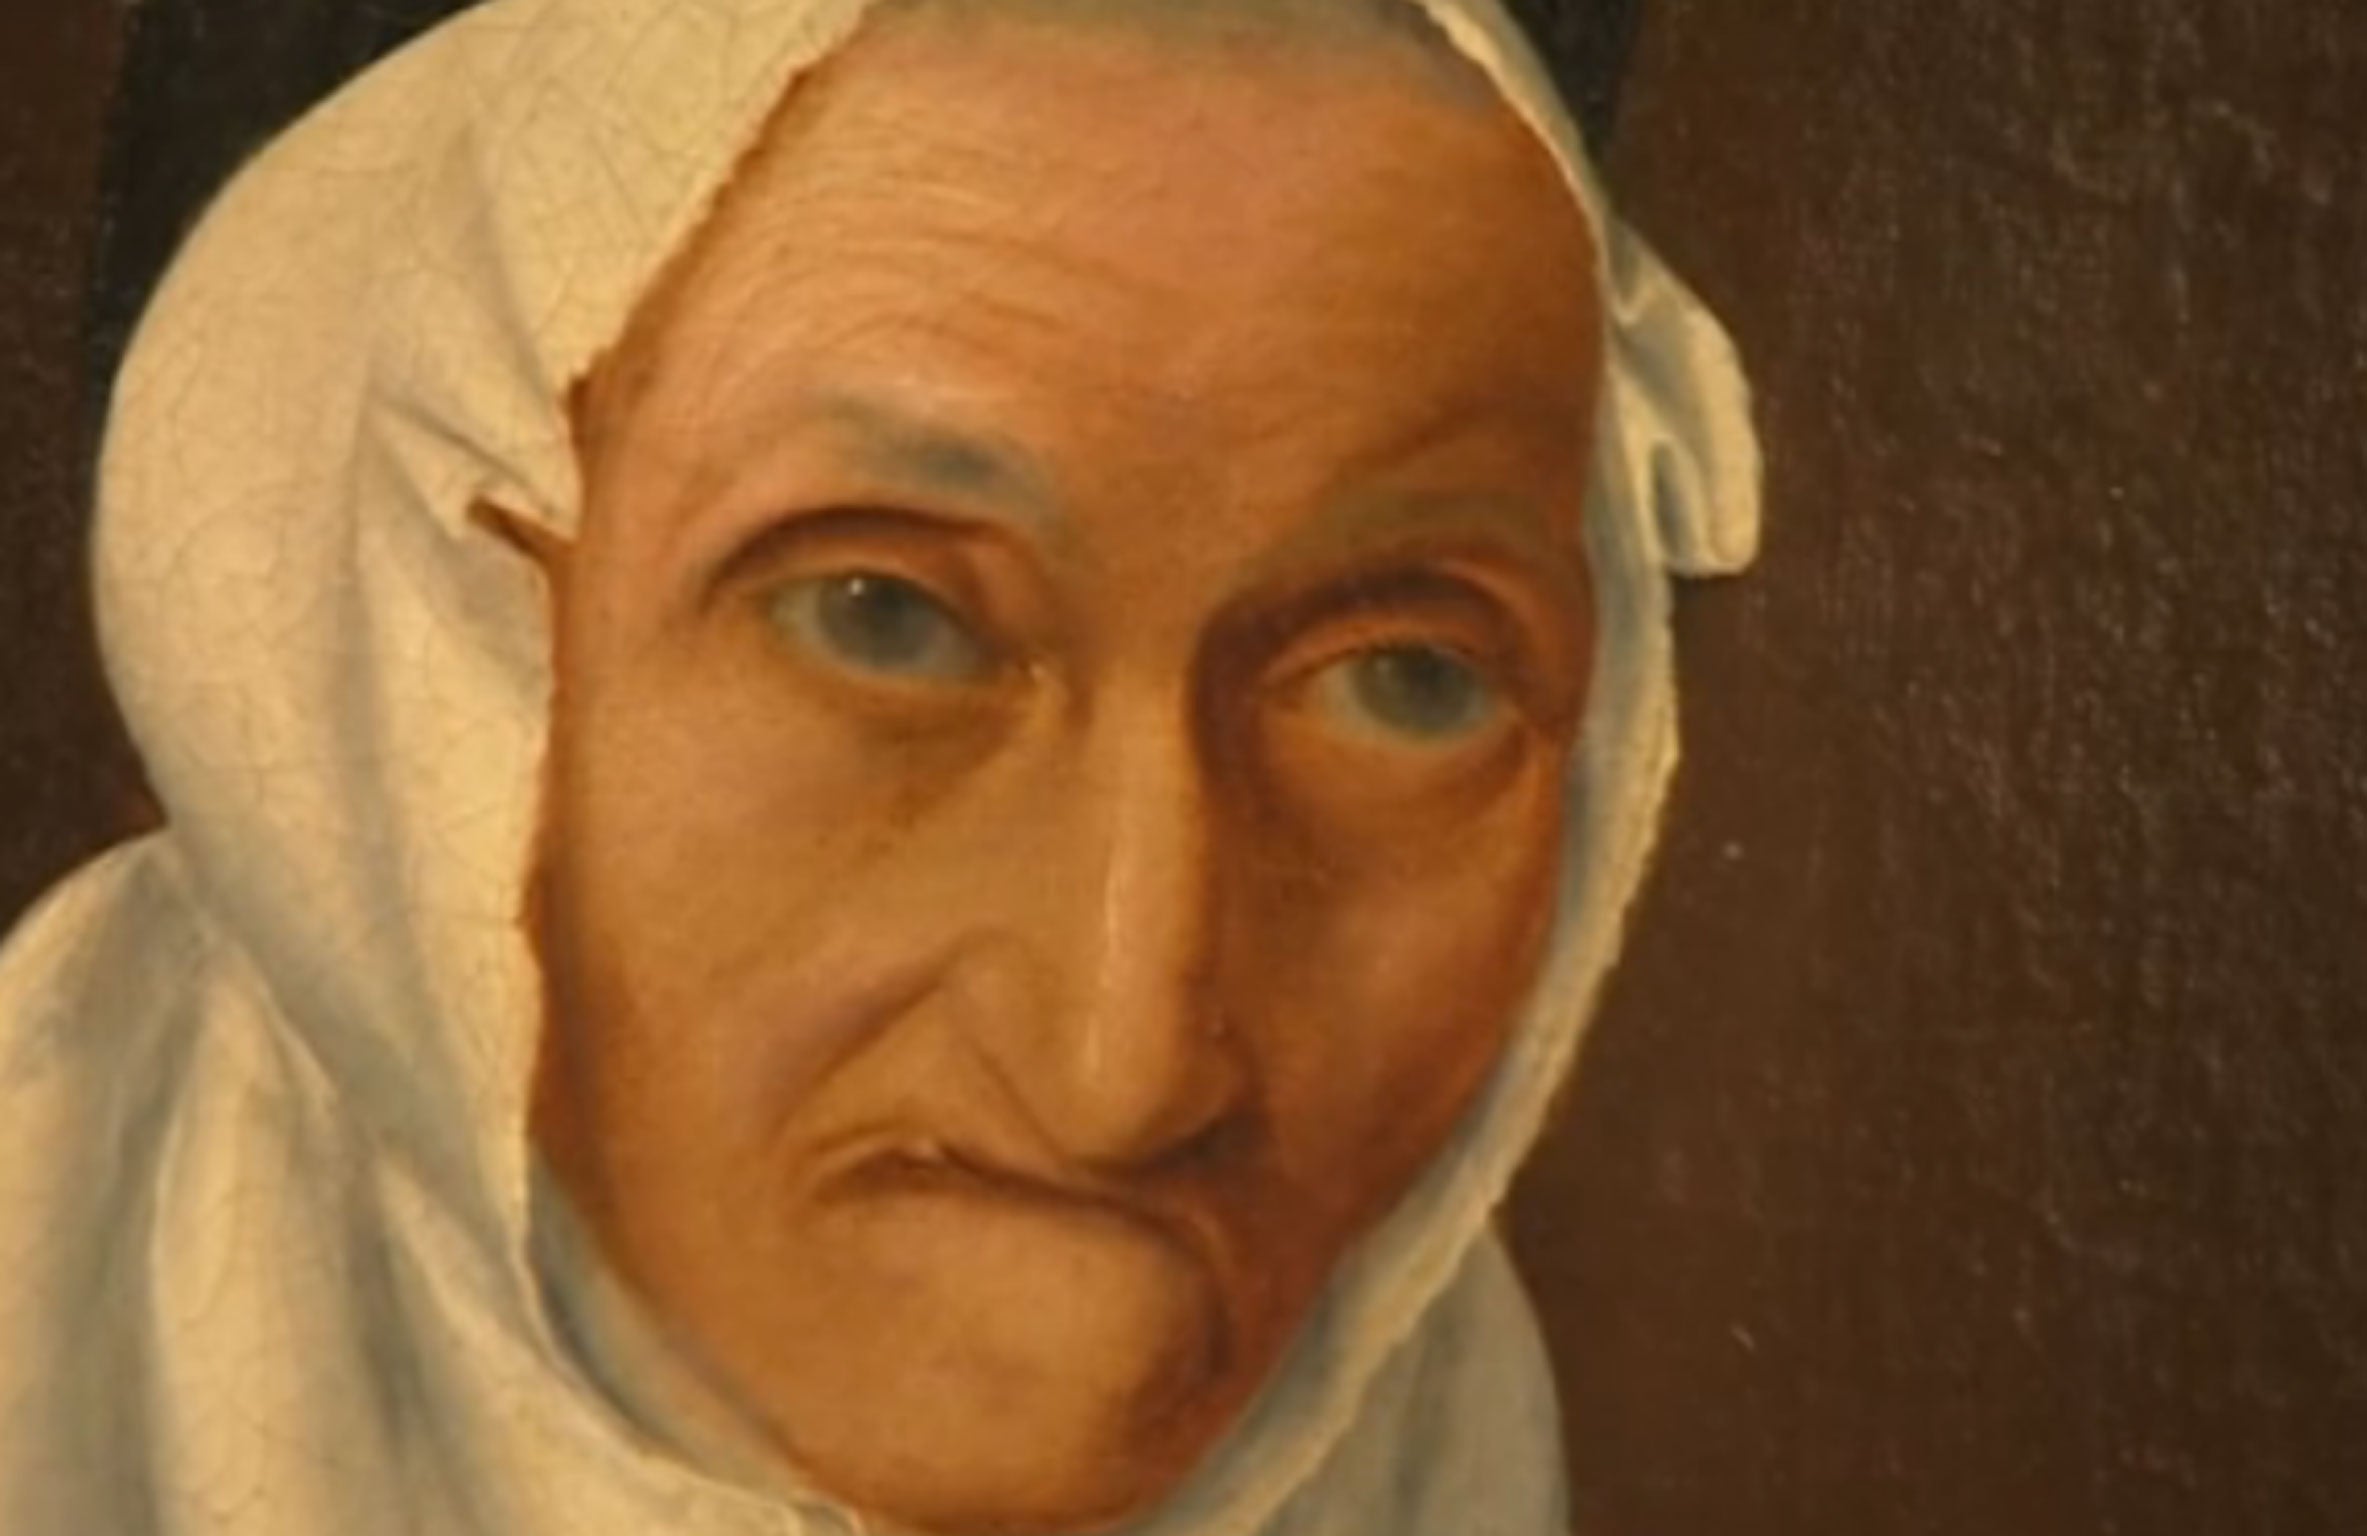 An elderly Winchester couple have been left baffled after 300-year-old portrait of a "ugly" woman in a white headscarf was posted to them with no explanation.